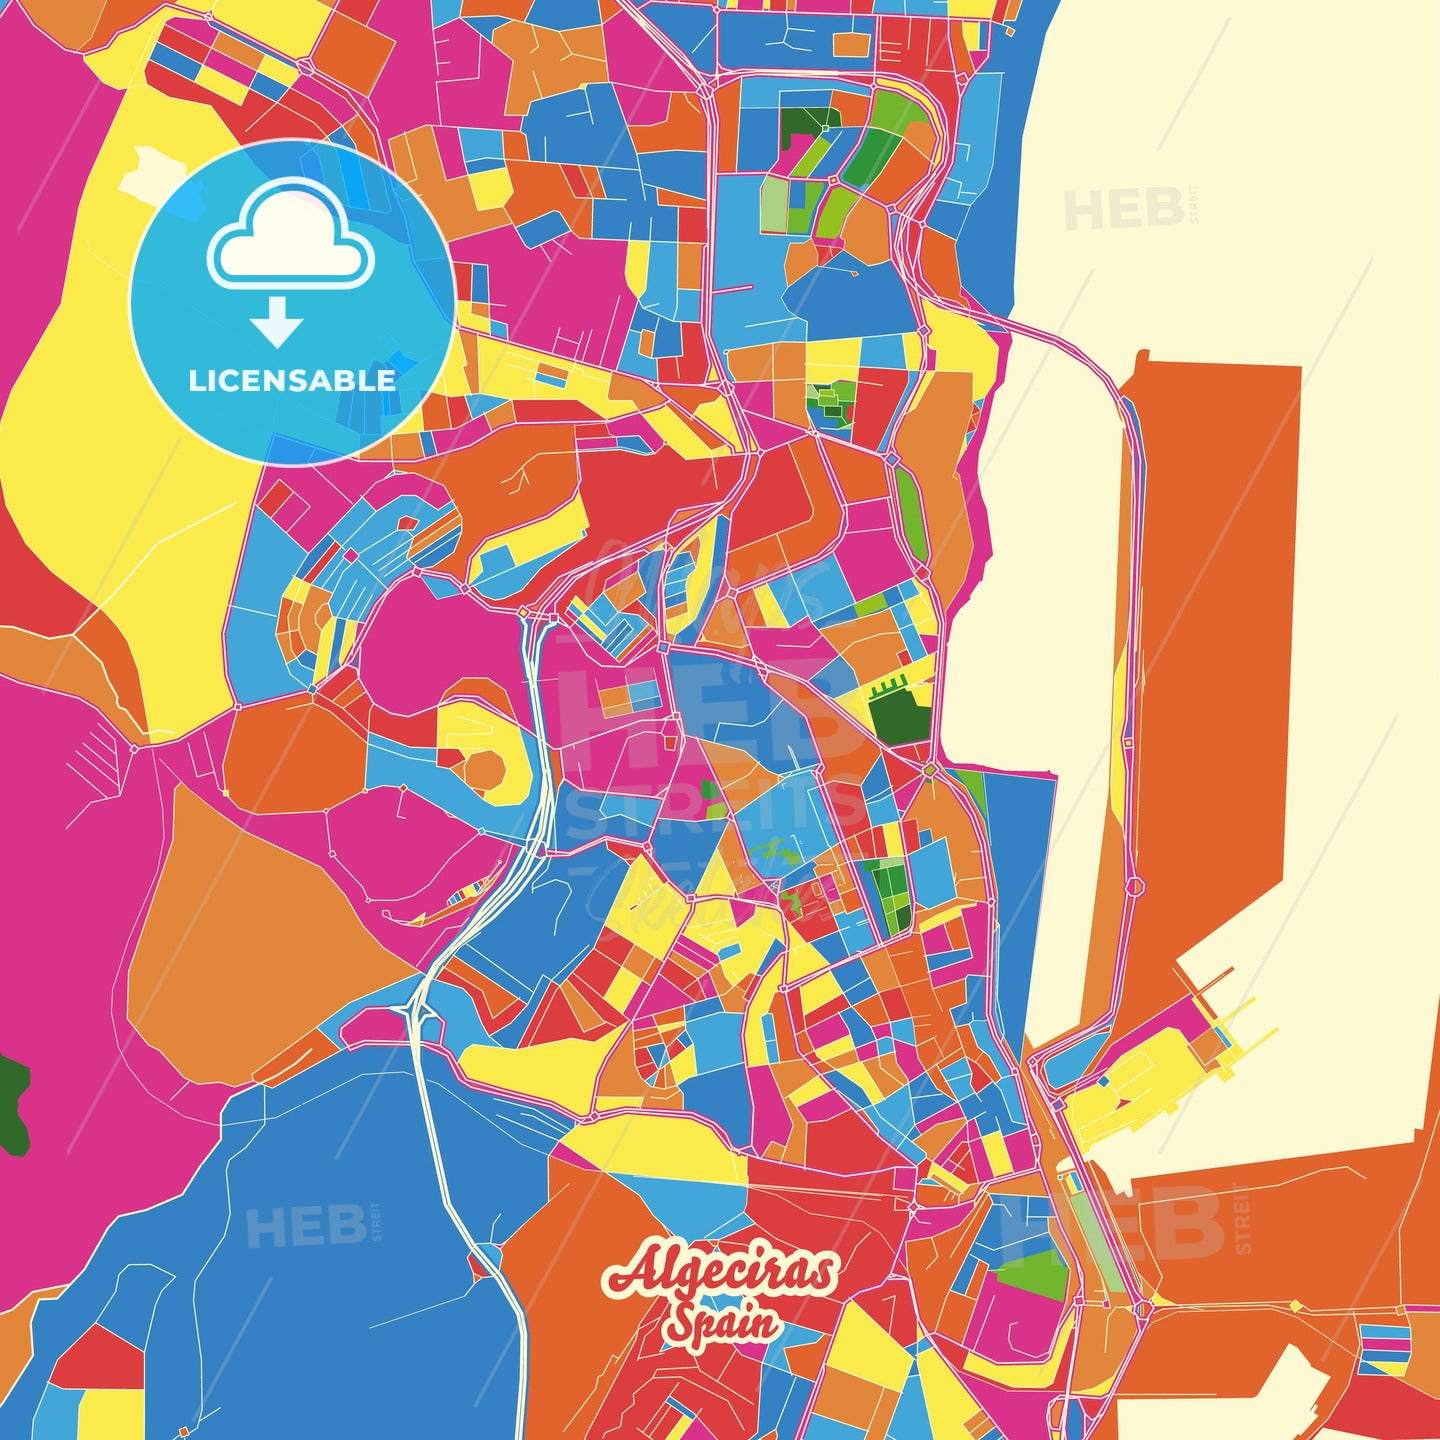 Algeciras, Spain Crazy Colorful Street Map Poster Template - HEBSTREITS Sketches